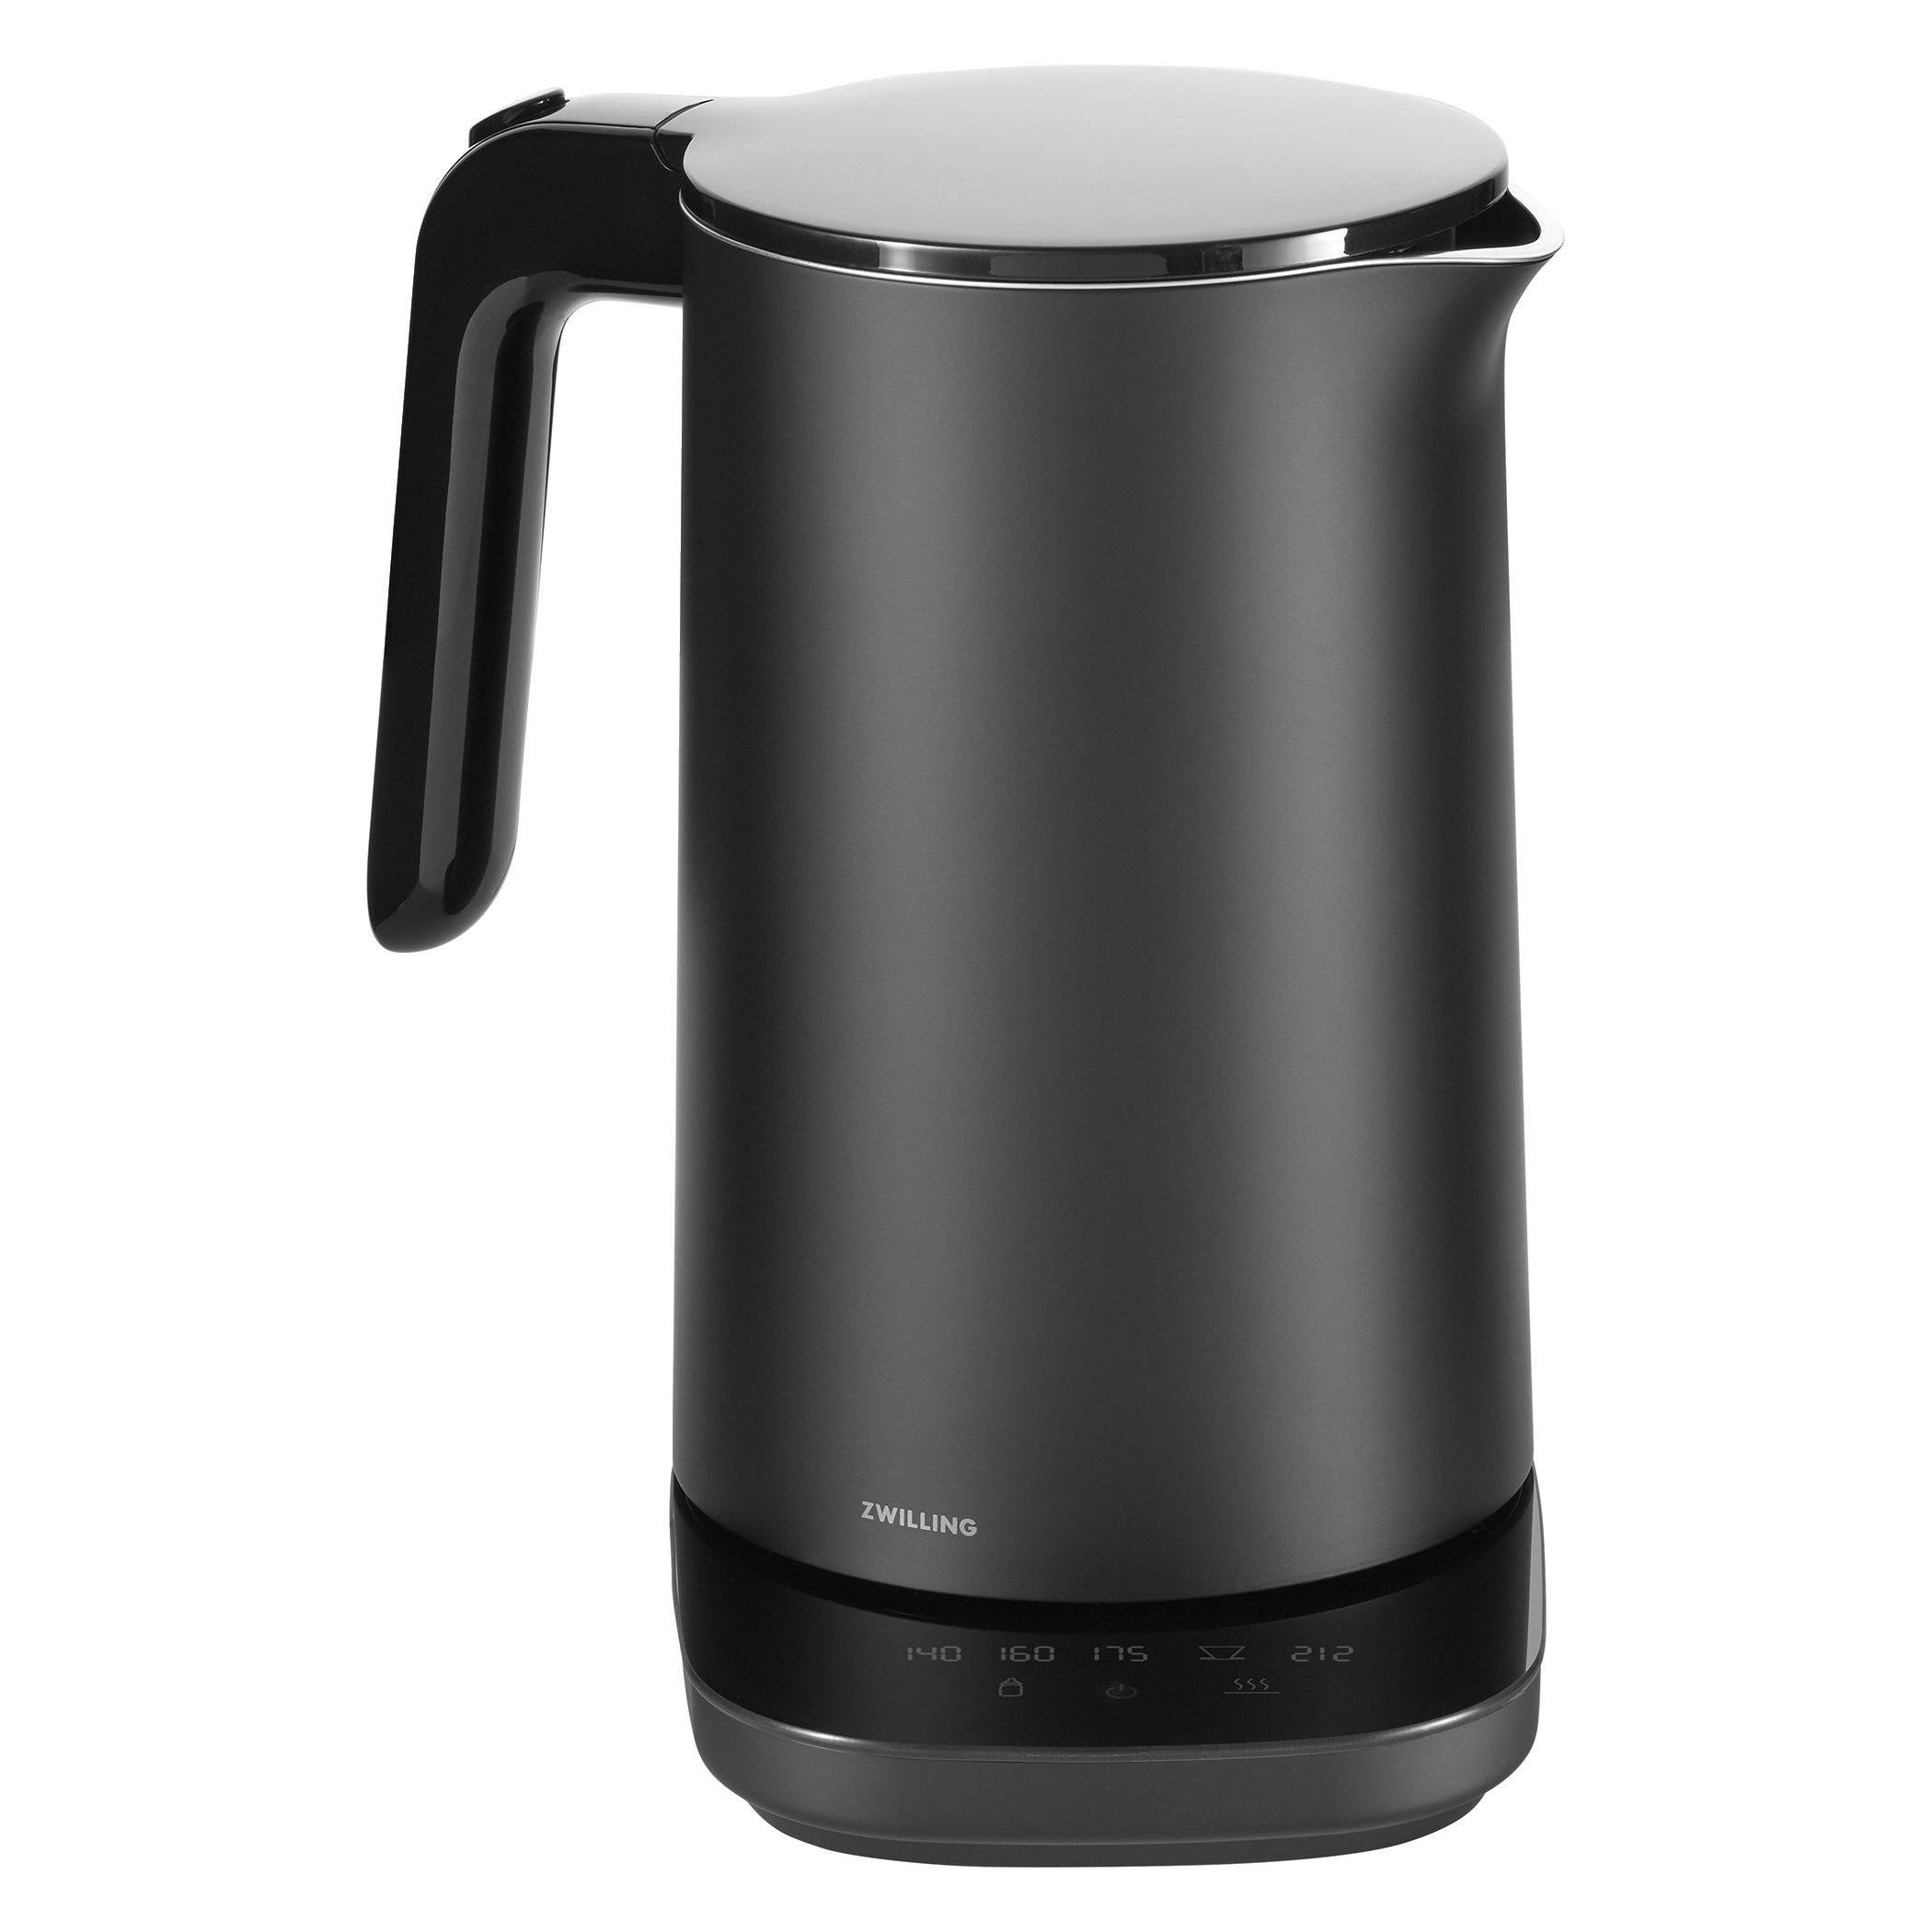 Zwilling Enfinigy Cool Touch Kettle Pro (Silver)